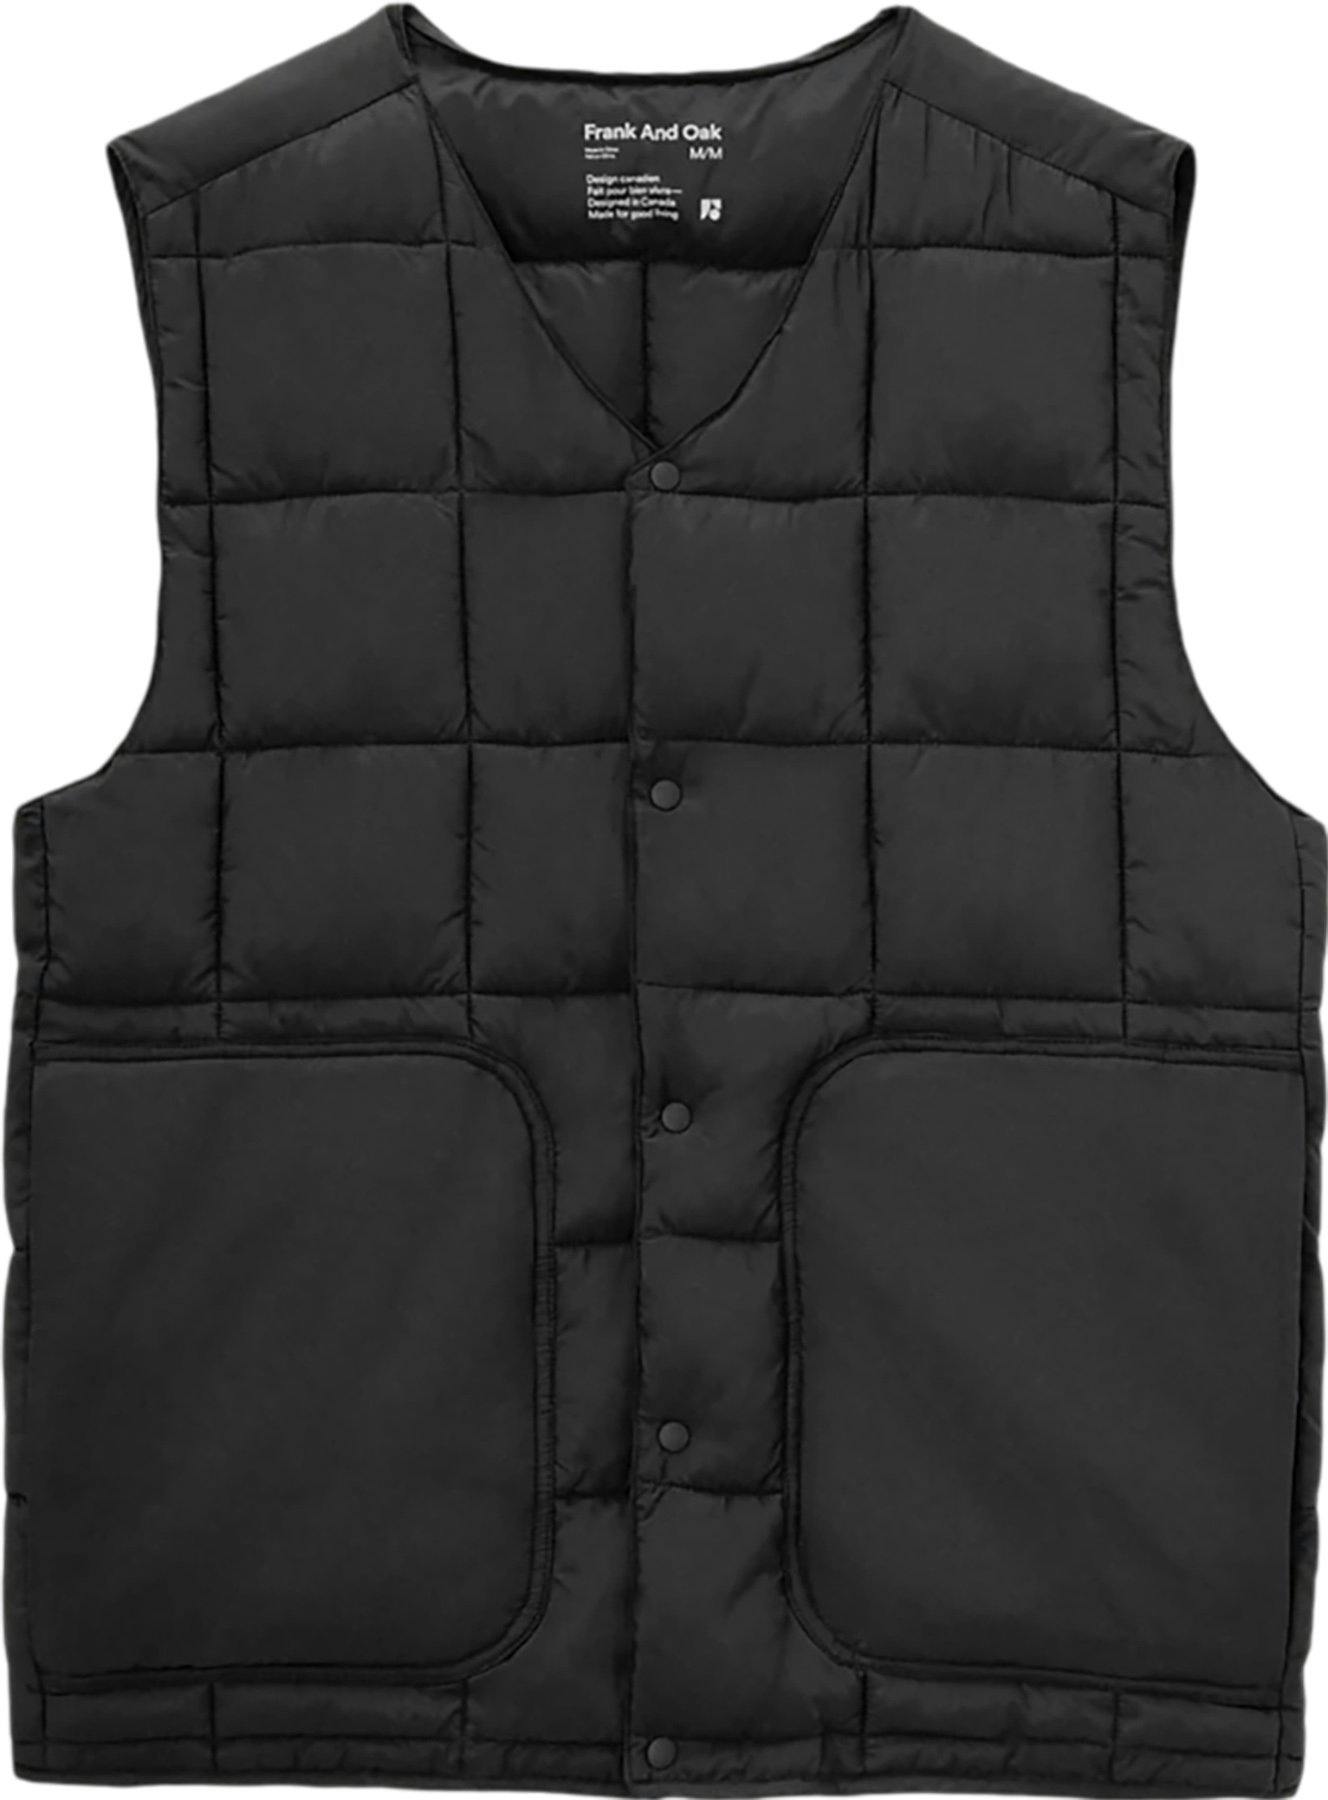 Product image for Aero Quilted Vest - Men's